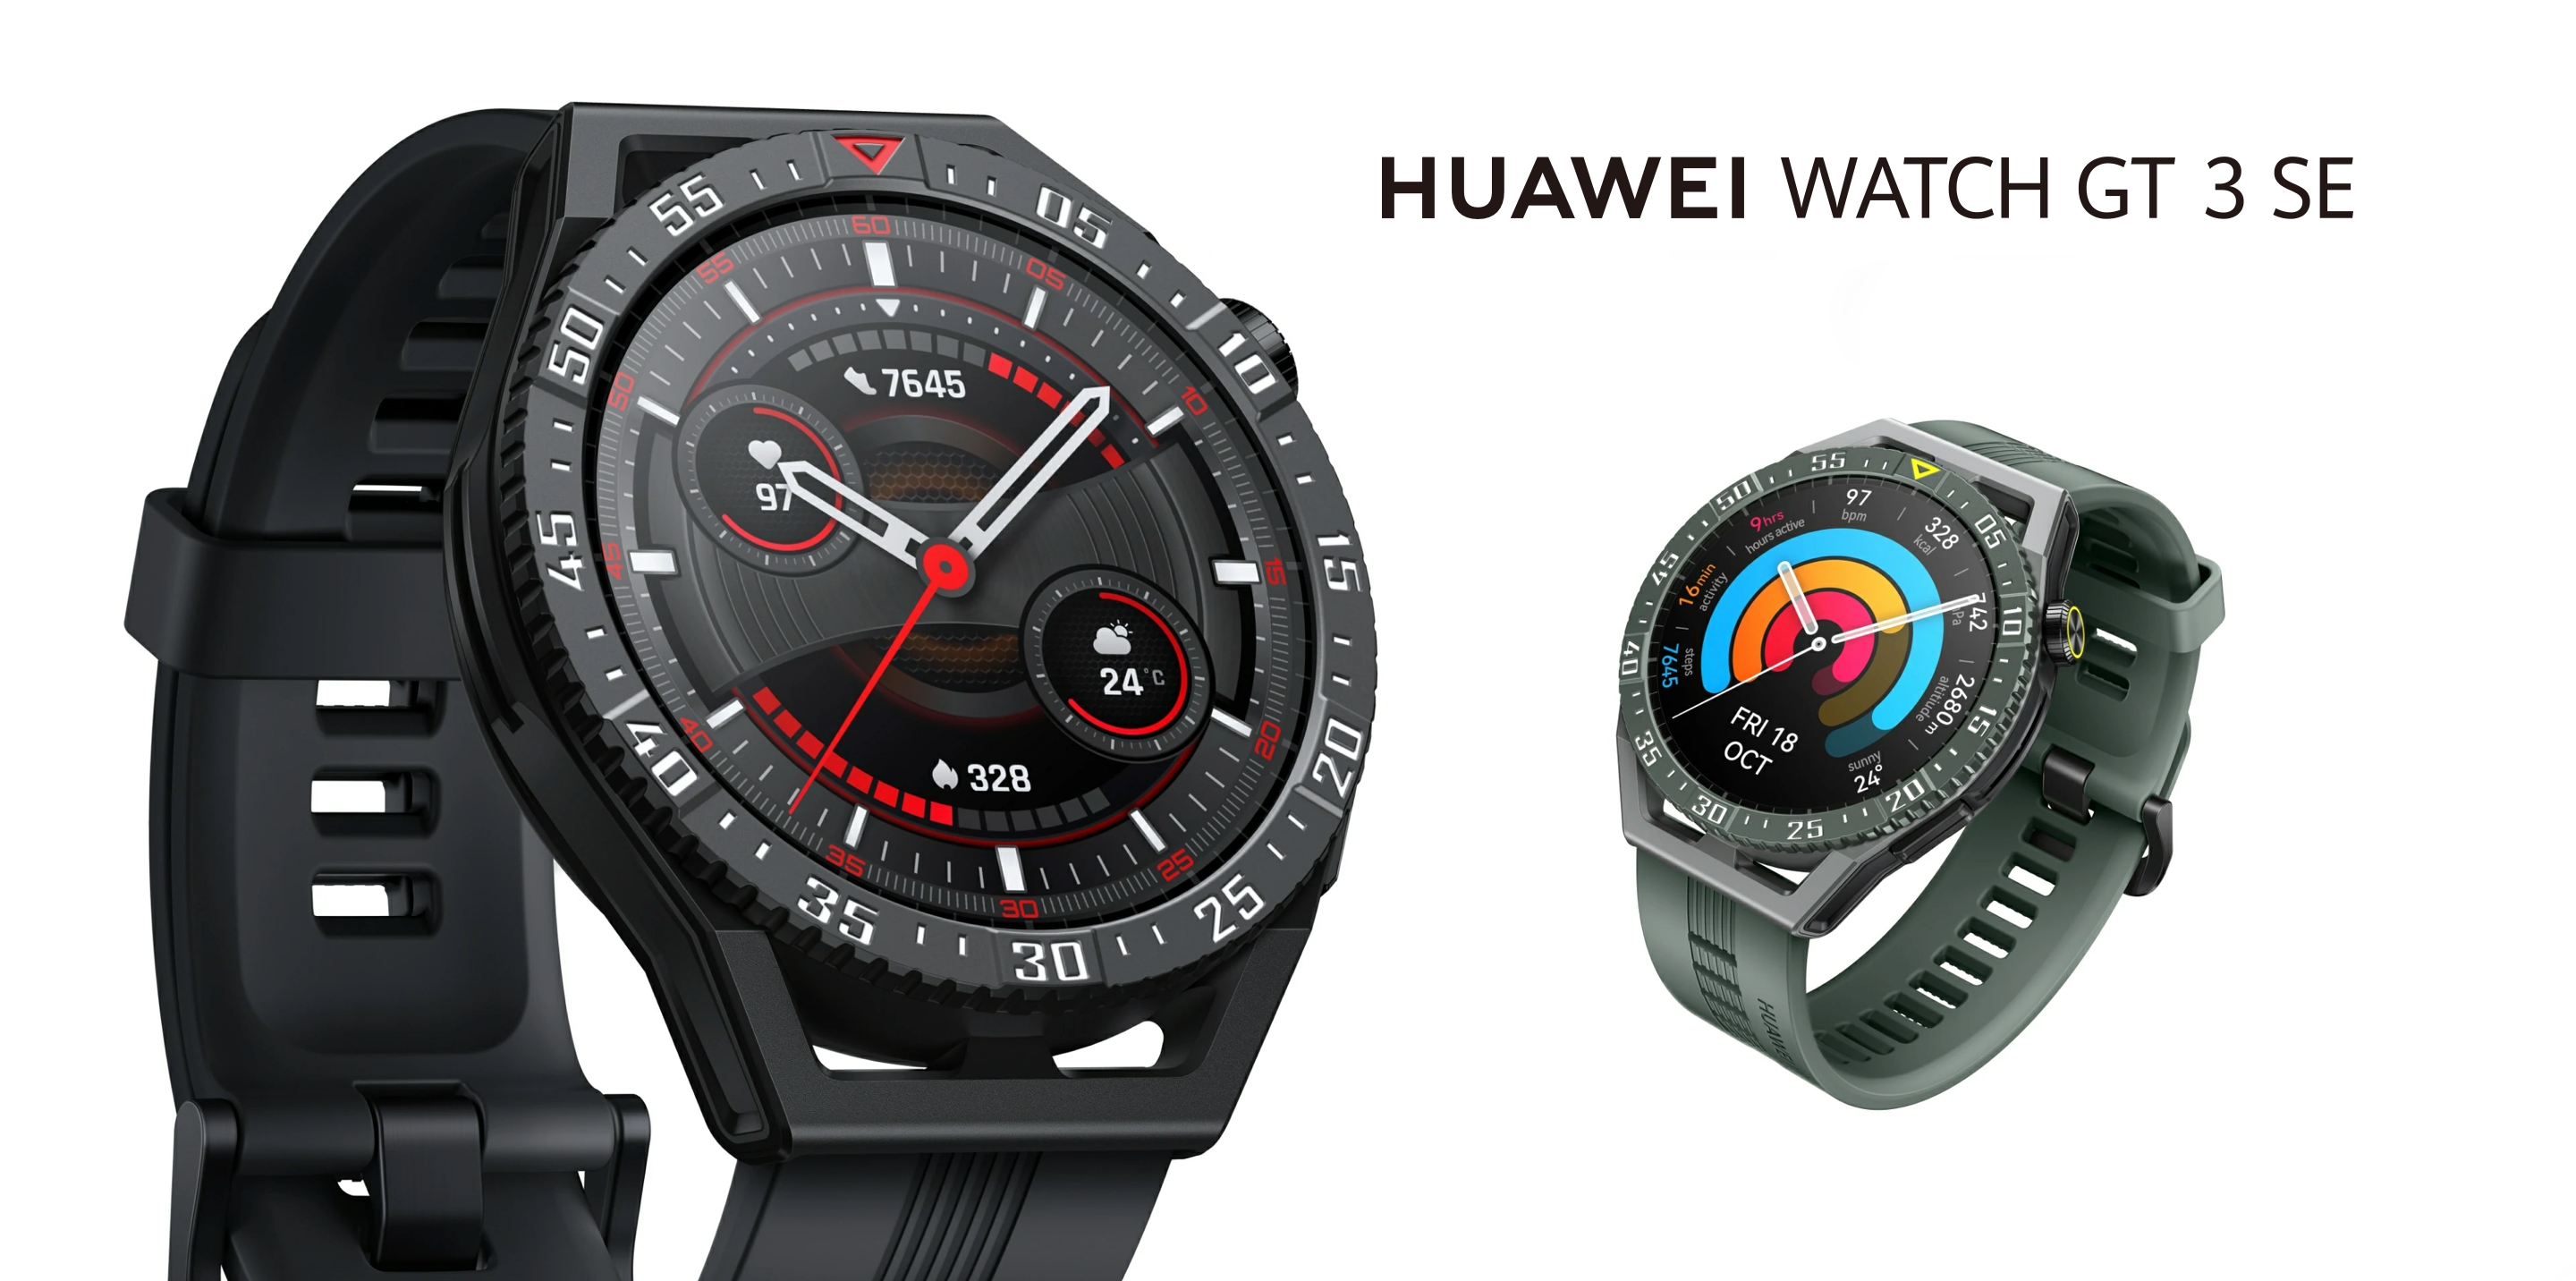 Huawei Watch GT 3 SE: smartwatch for the global market with AMOLED screen, water protection, SpO2 sensor and battery life up to 14 days